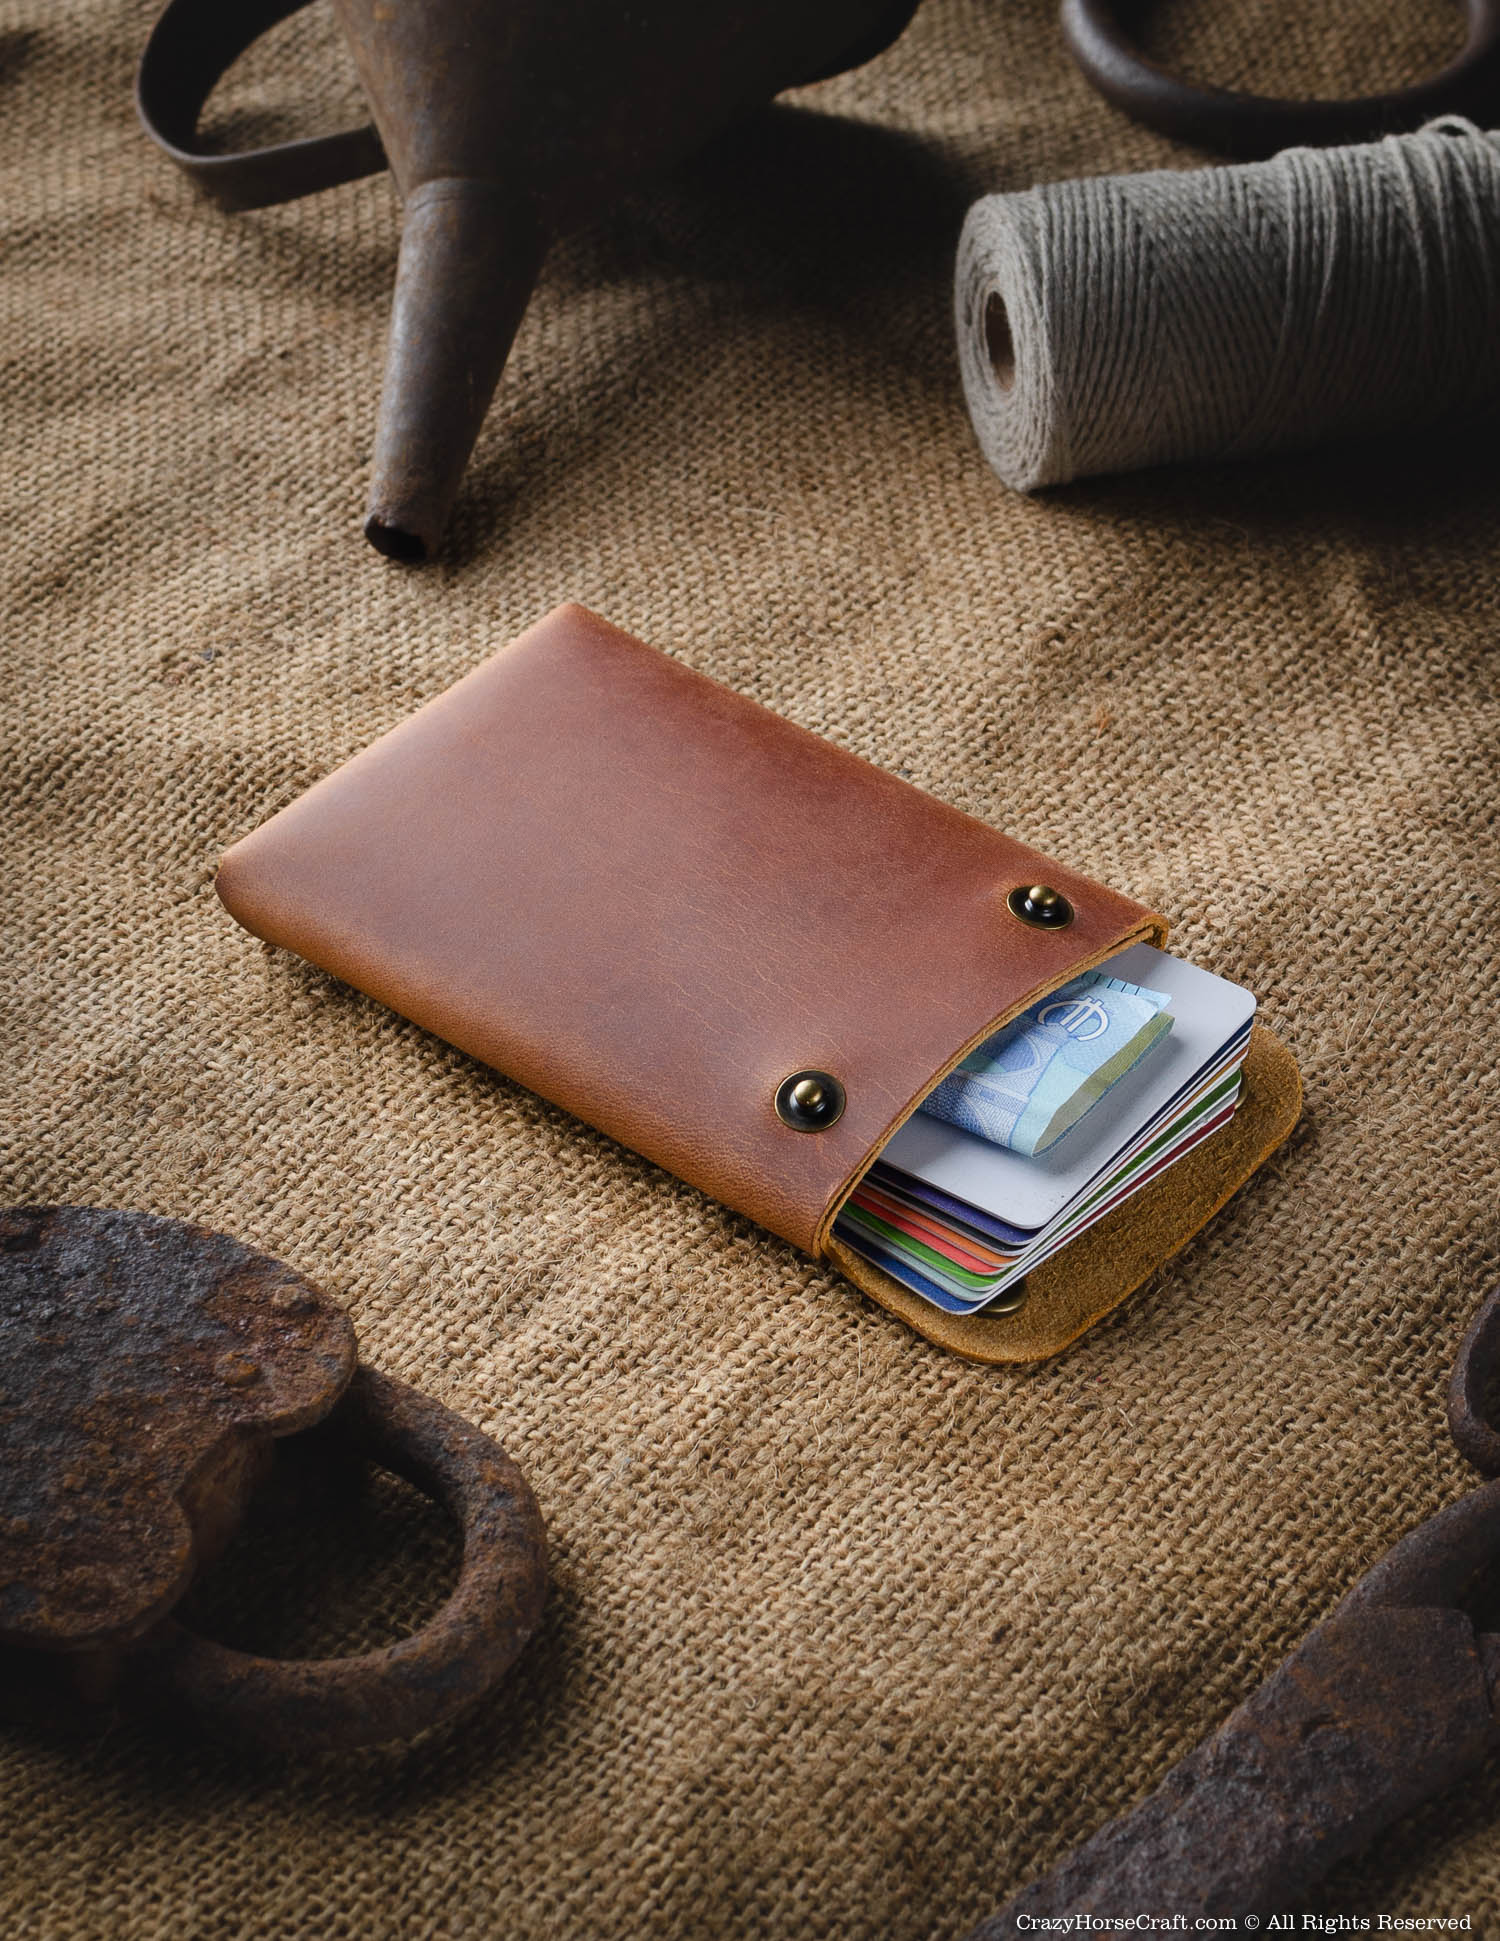 Luxury Leather Card Holder Handcrafted From Premium Italian 